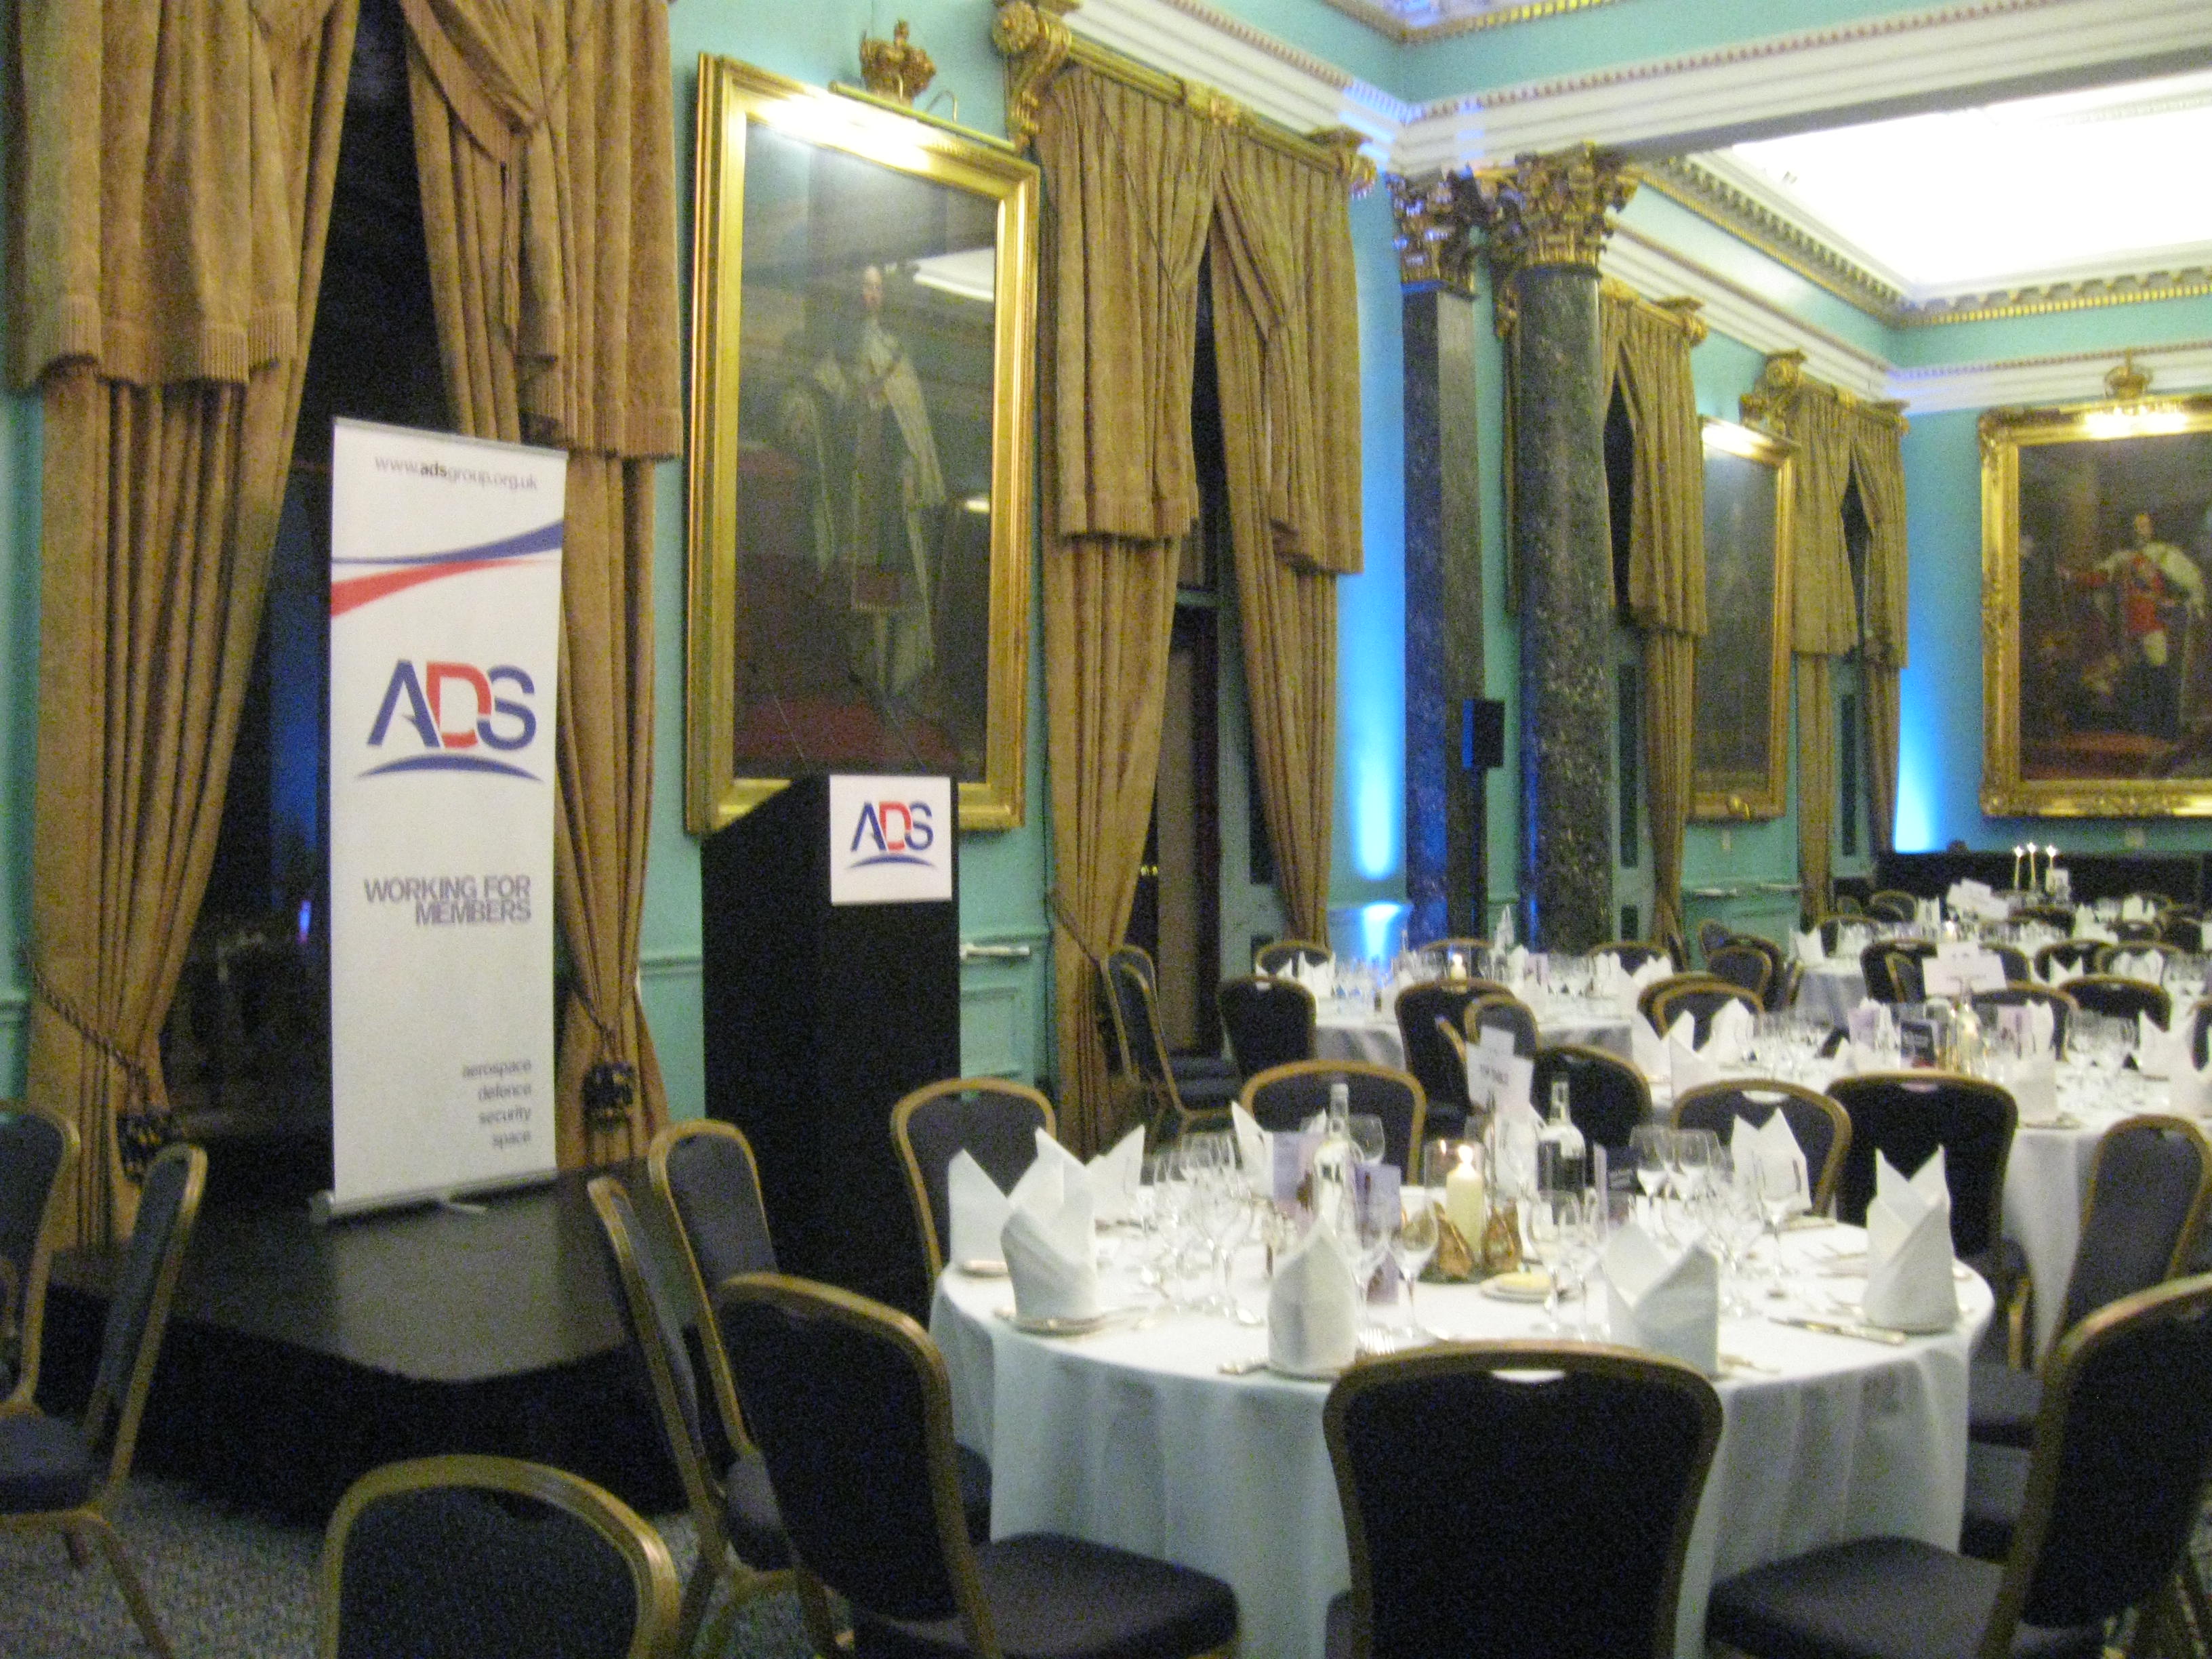 Tables laid in a grand room with gold curtains and an ADS sign